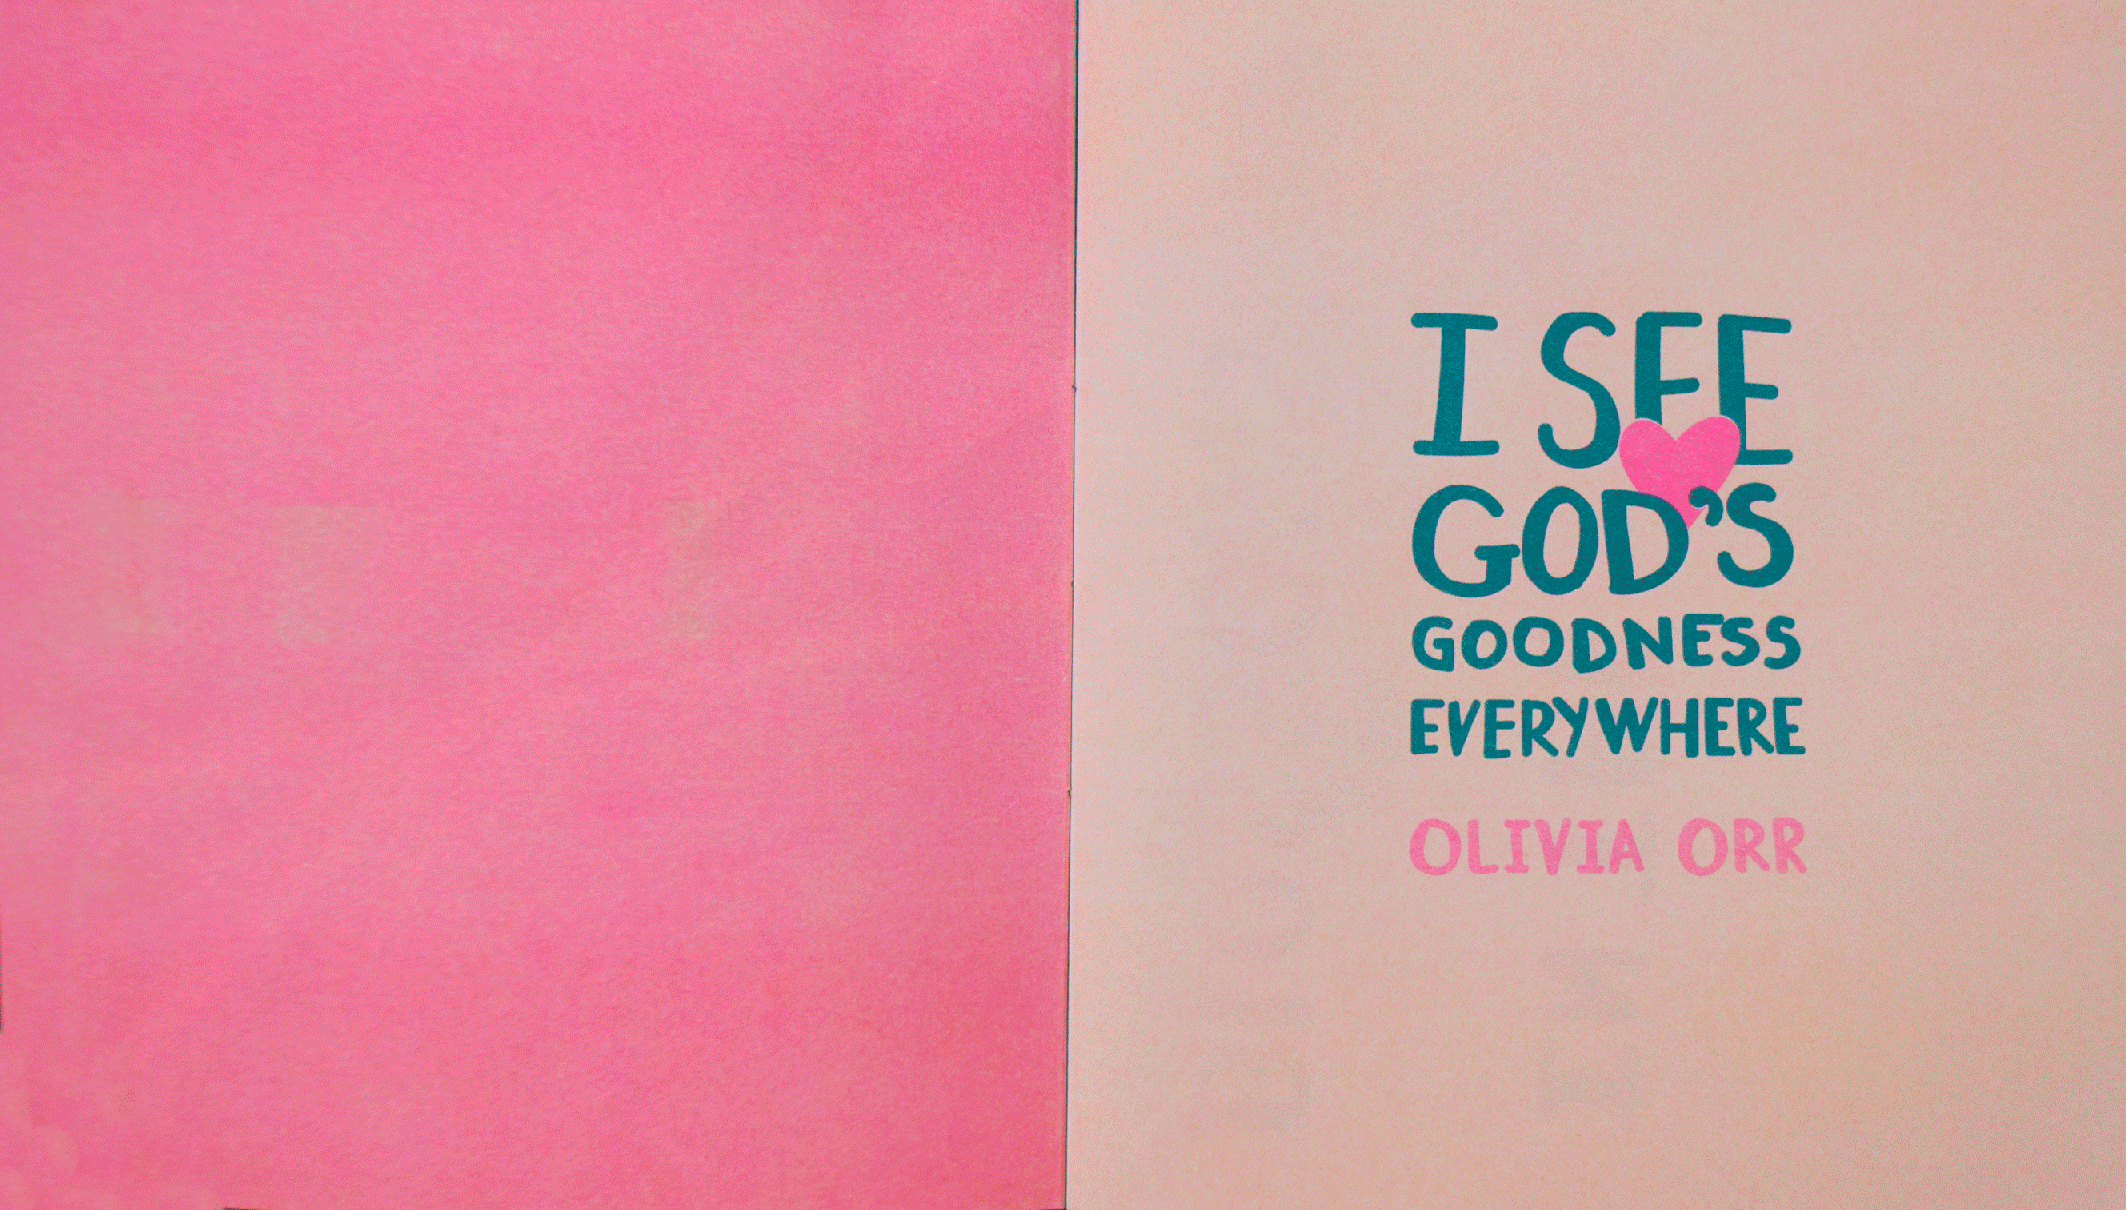 Pages from the book "I See God's Goodness Everywhere" by Olivia Orr